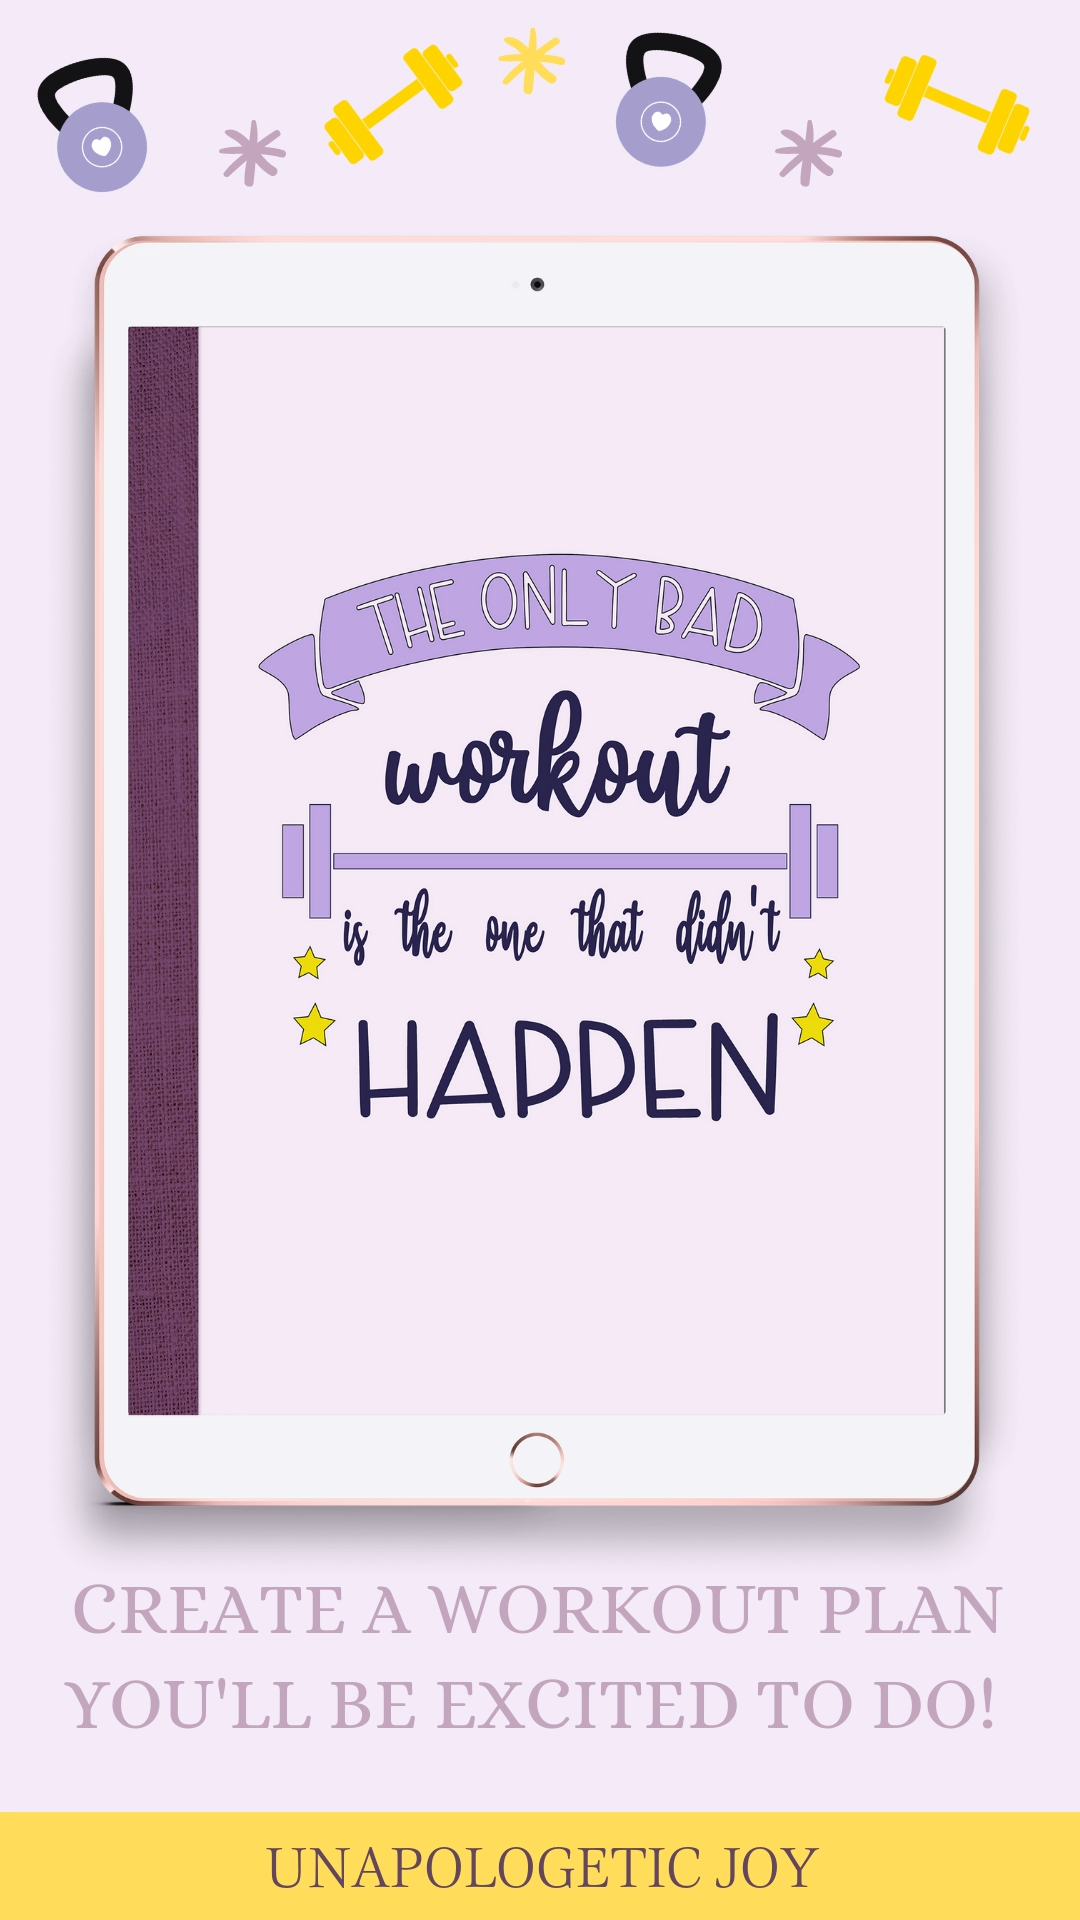 No Bad Workout Digital Fitness Planner - No Bad Workout Digital Fitness Planner -   19 commit30 fitness Planner ideas